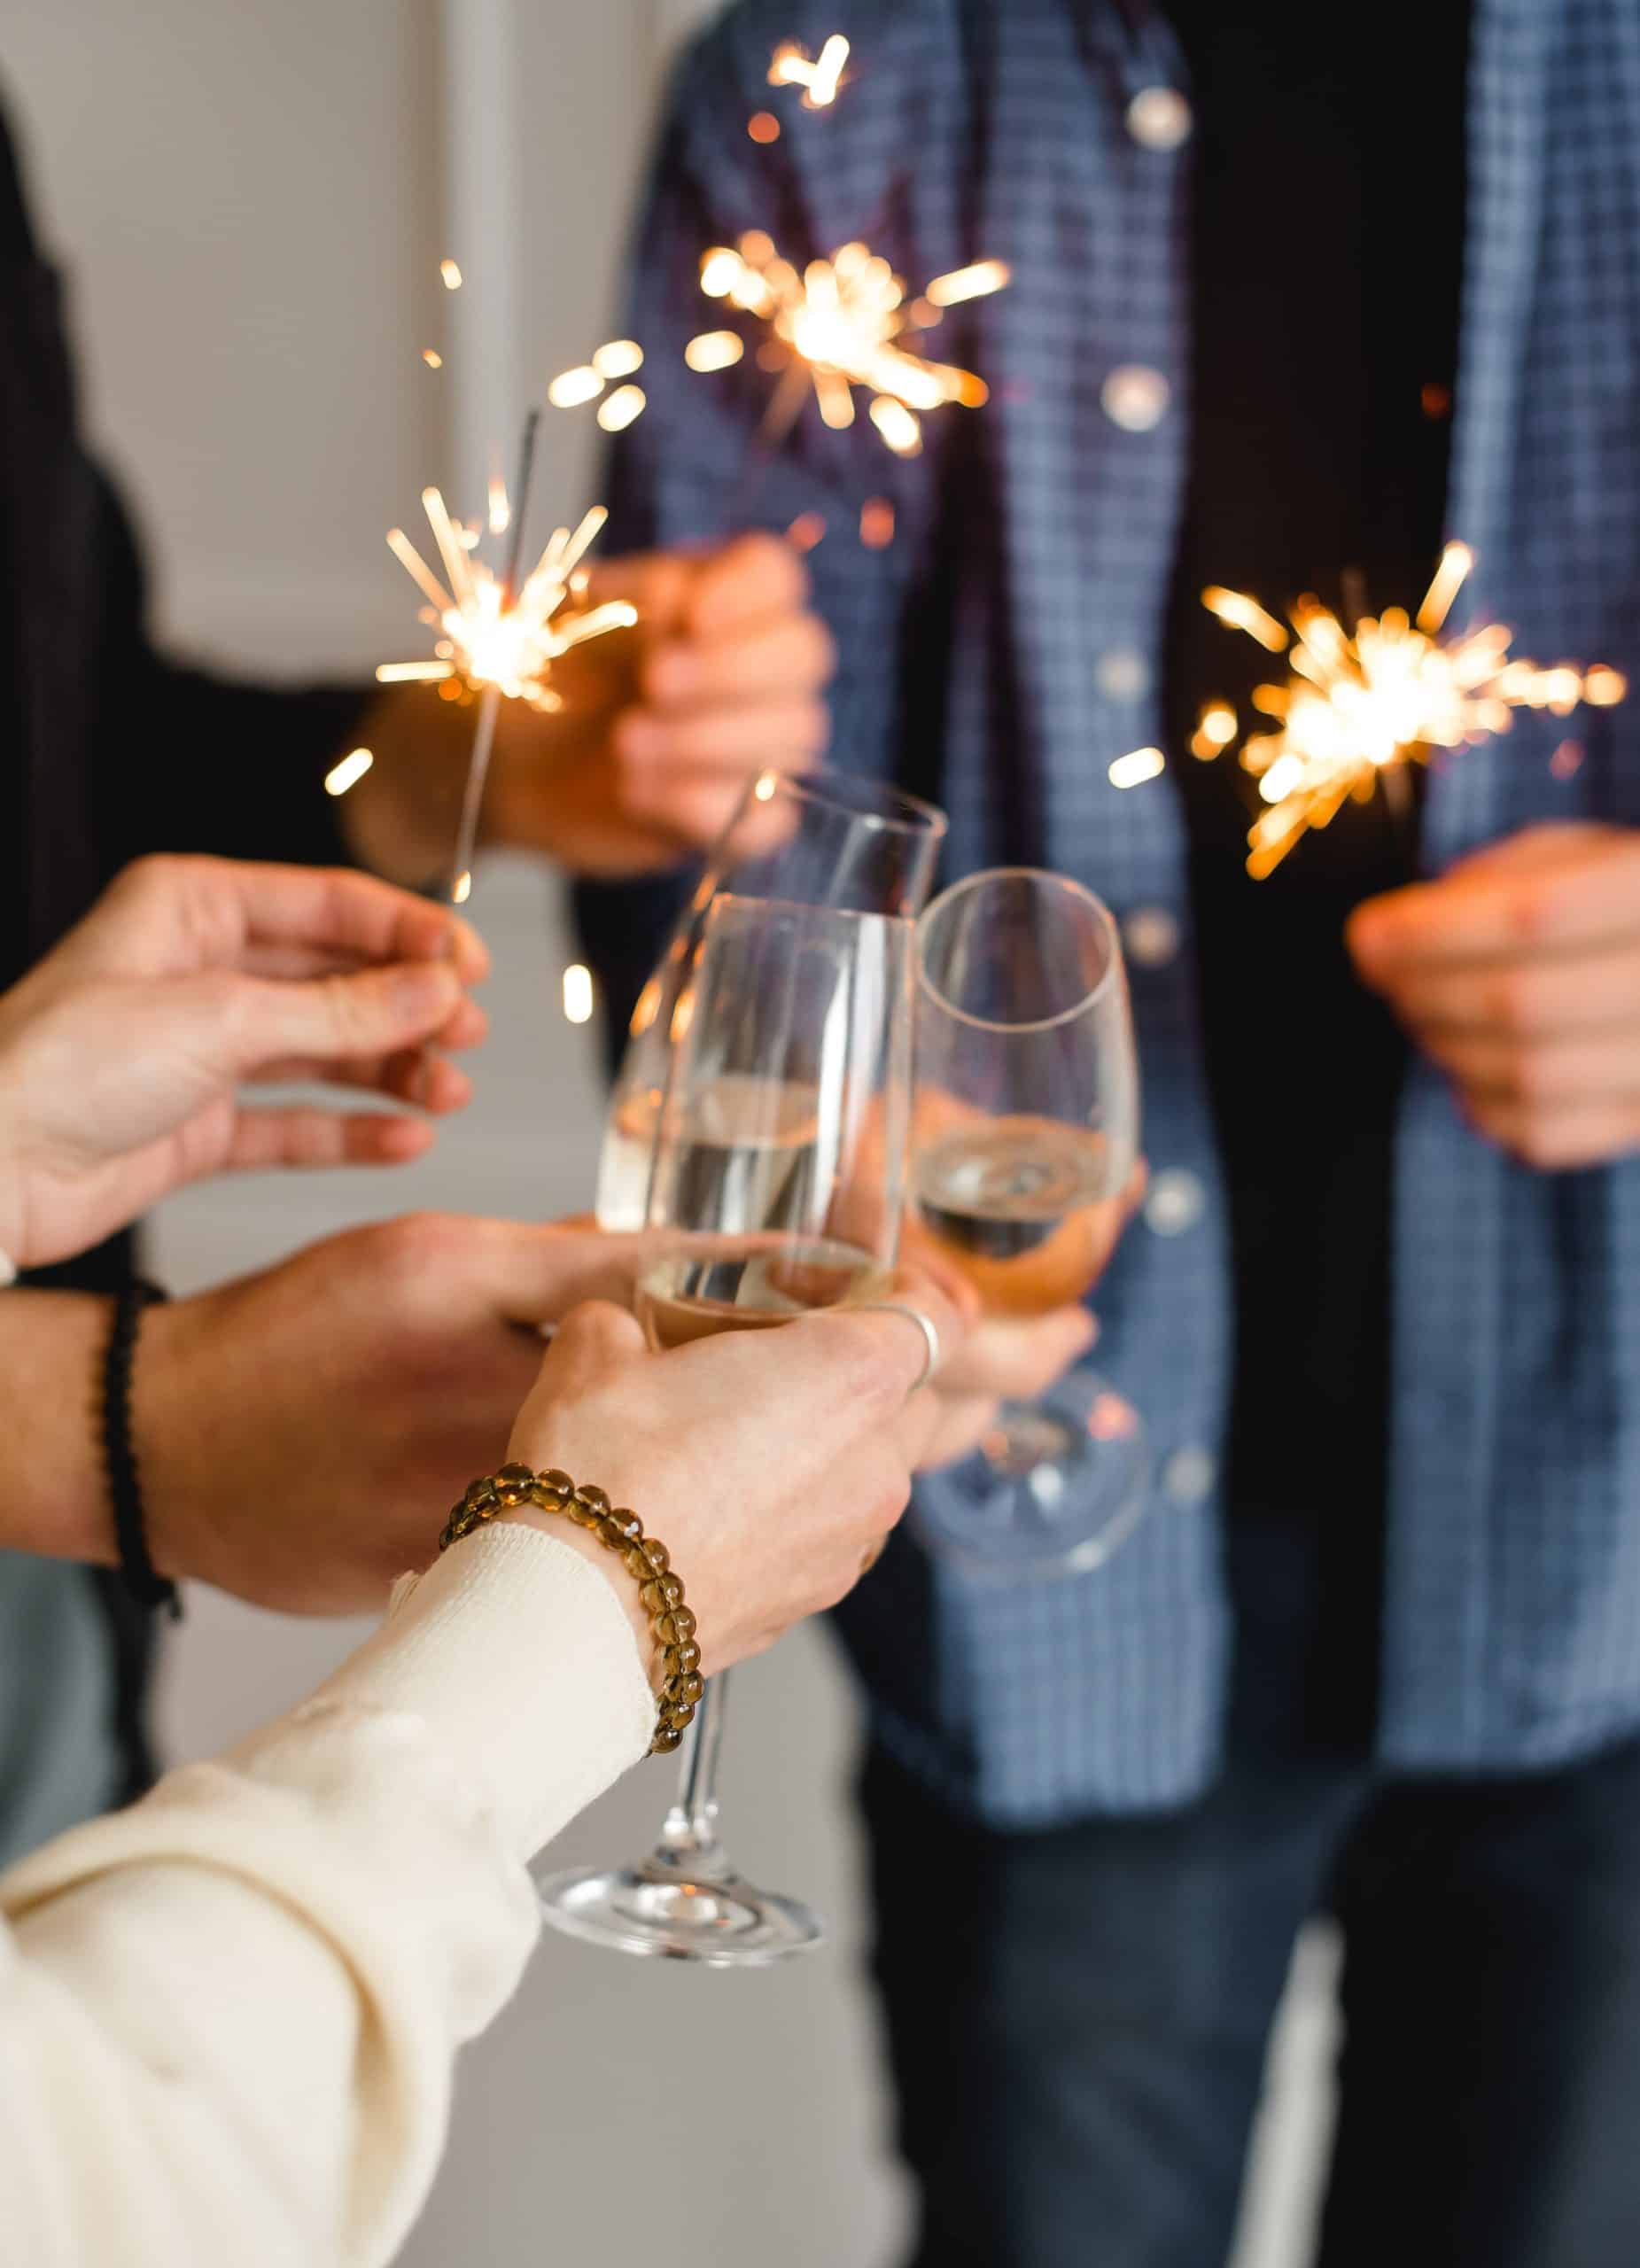 New Year's Eve stock photo